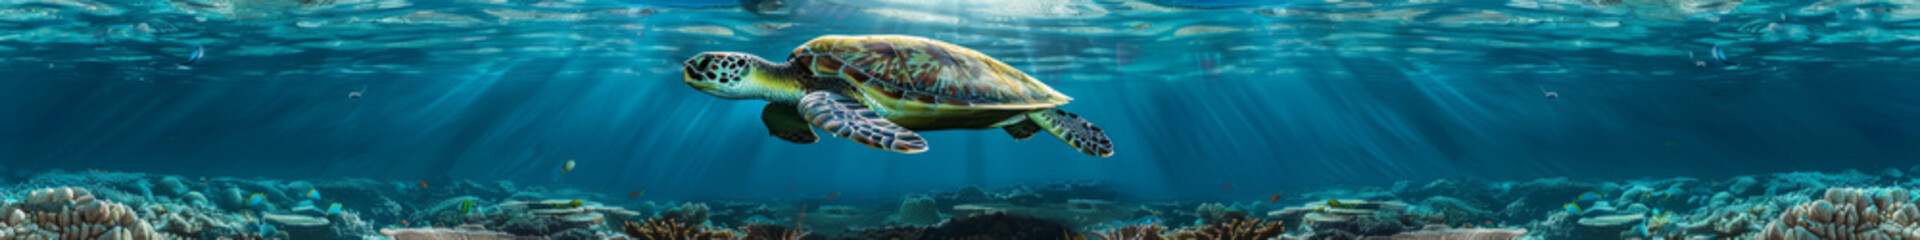 Majestic Sea Turtle Gliding in Clear Blue Ocean Over Coral Reef